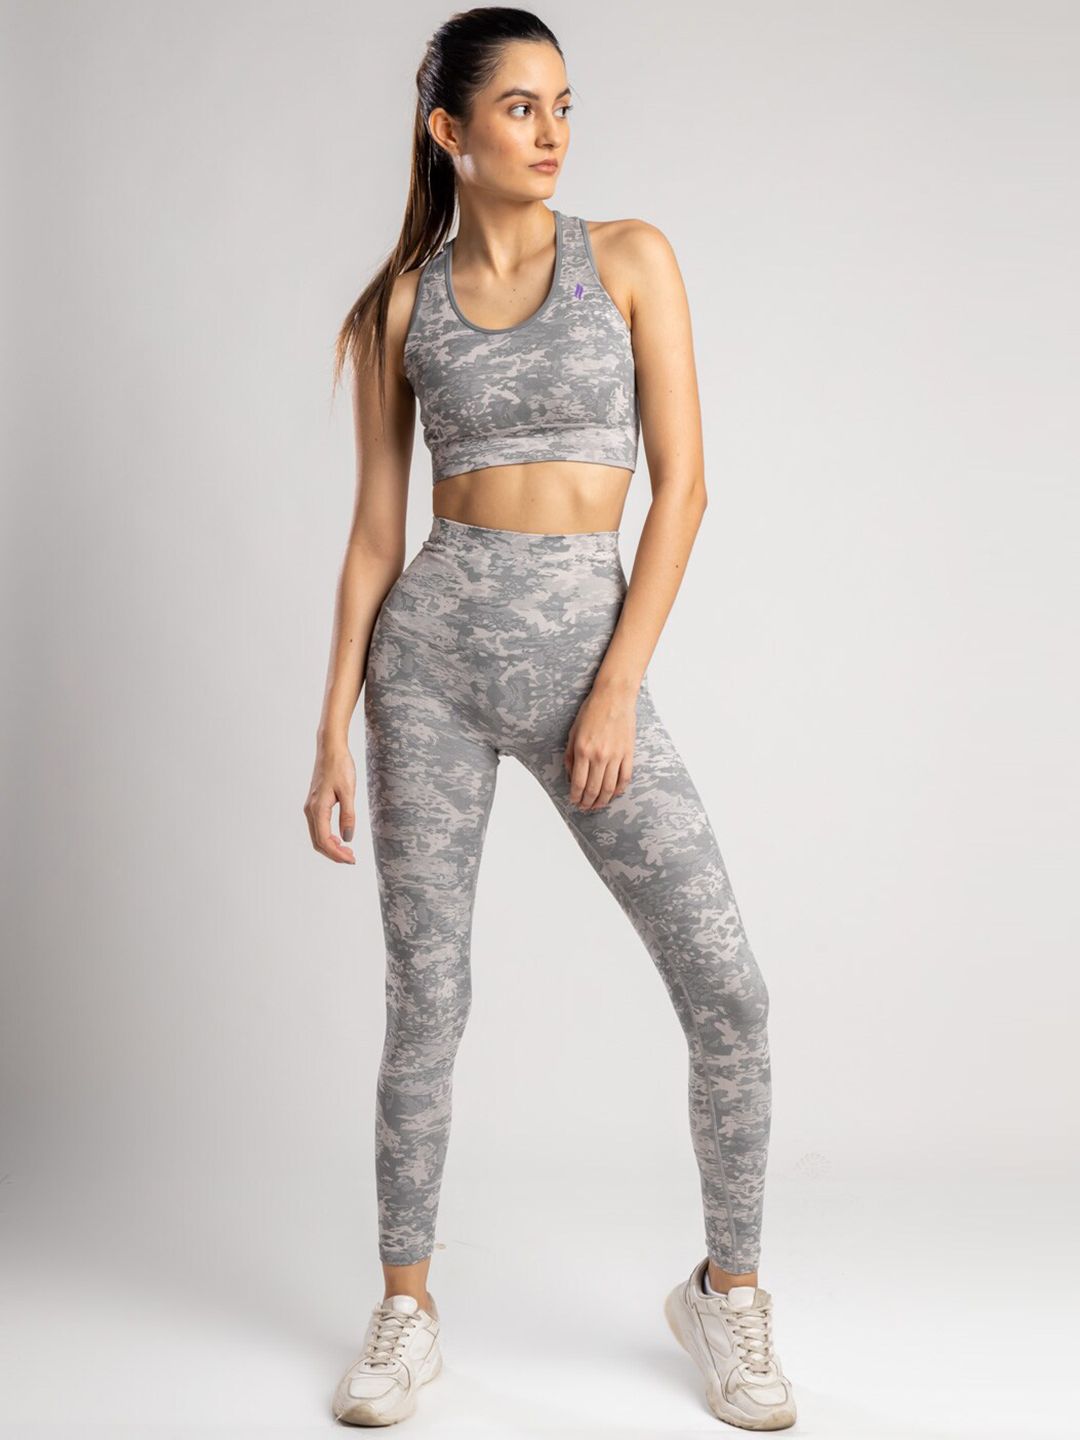 SKNZ Women Grey Camouflage Printed Tracksuit Price in India